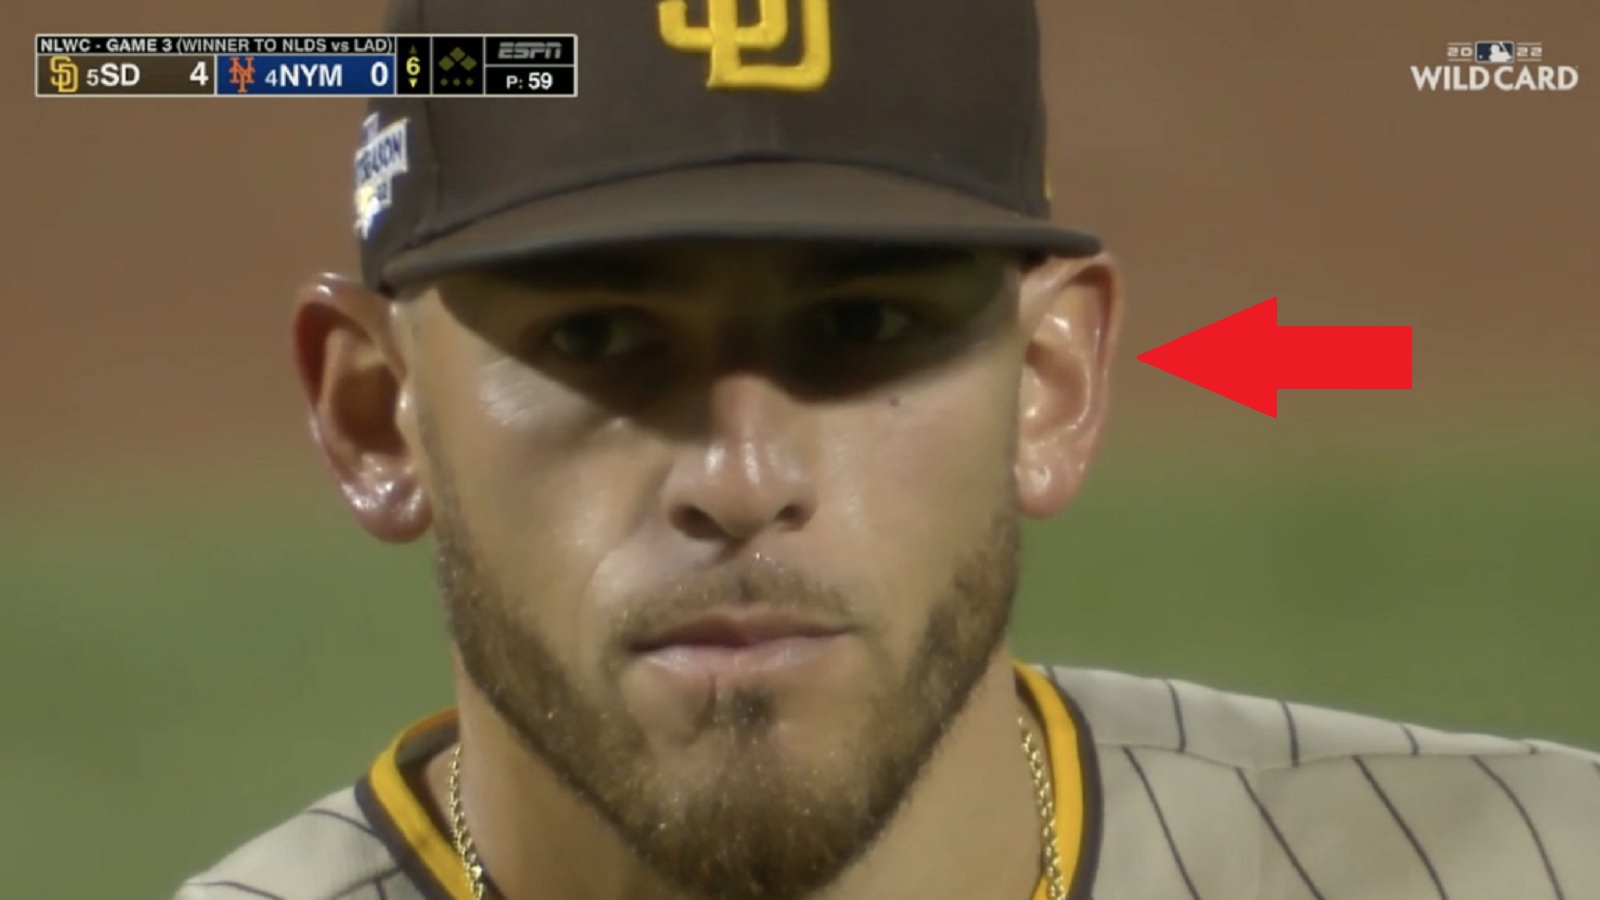 Joe Musgrove's shiny ears could be due to Red Hot ointment, MLB star claims